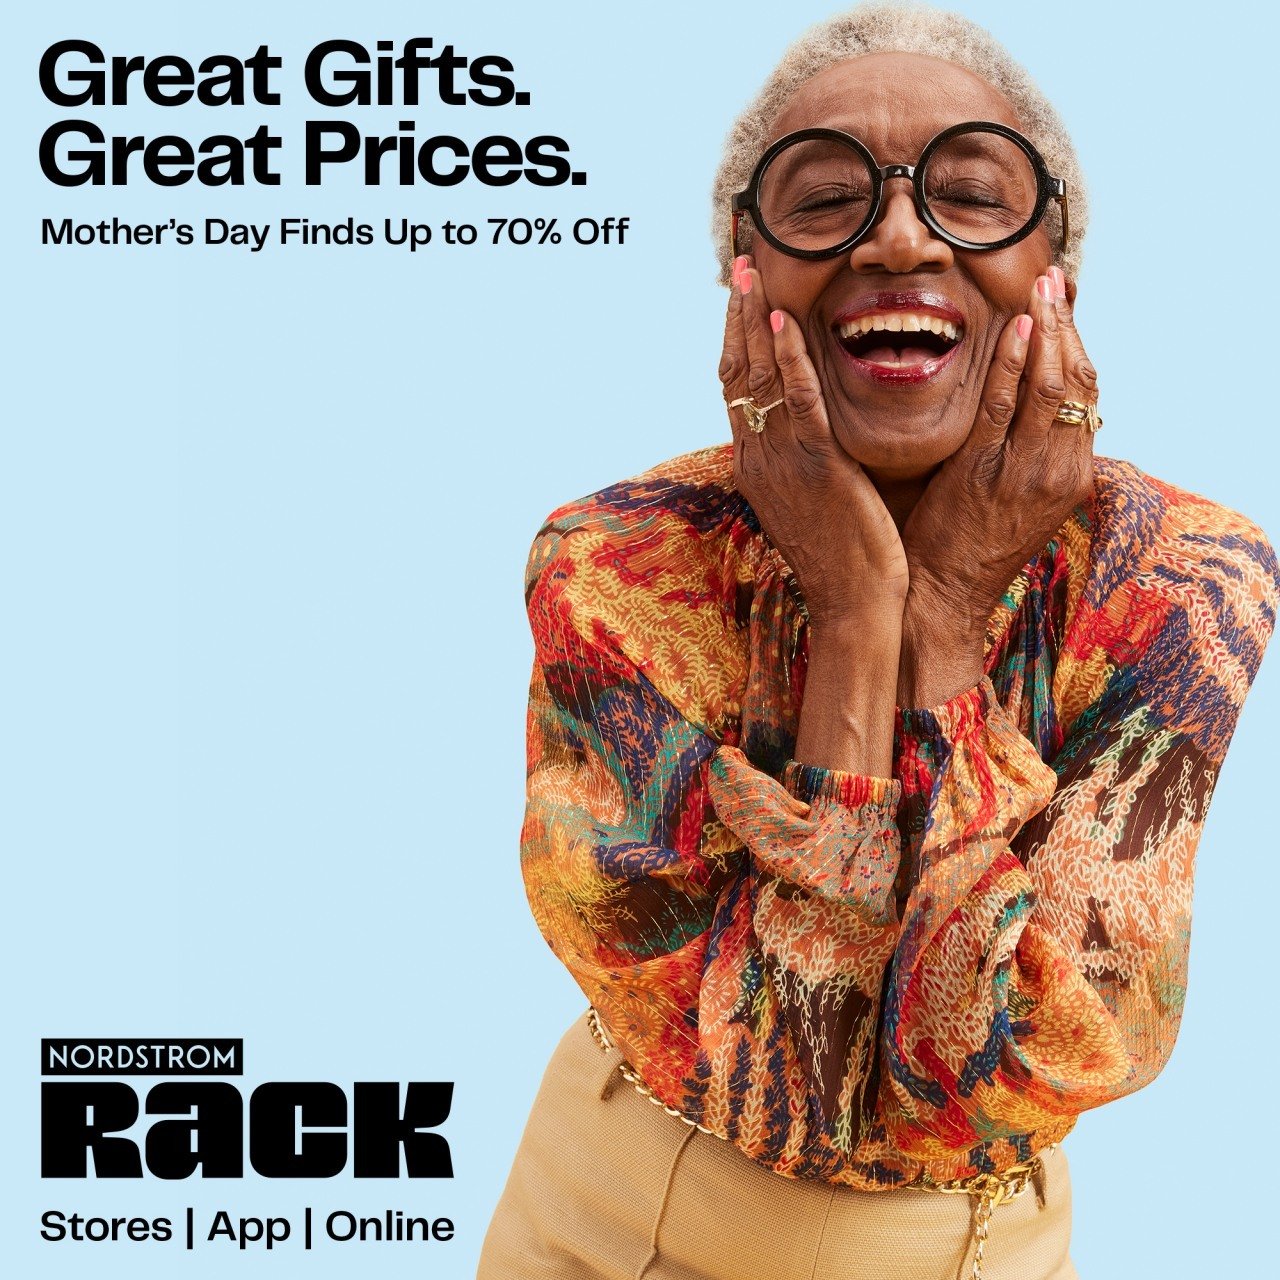 Looking for the perfect Mother's Day gift? Look no further! 🎁✨ 

@nordstromrack has you covered with amazing finds at unbeatable prices, with discounts of up to 70% off!

From stylish fashion pieces to trendy accessories, they have everything you ne